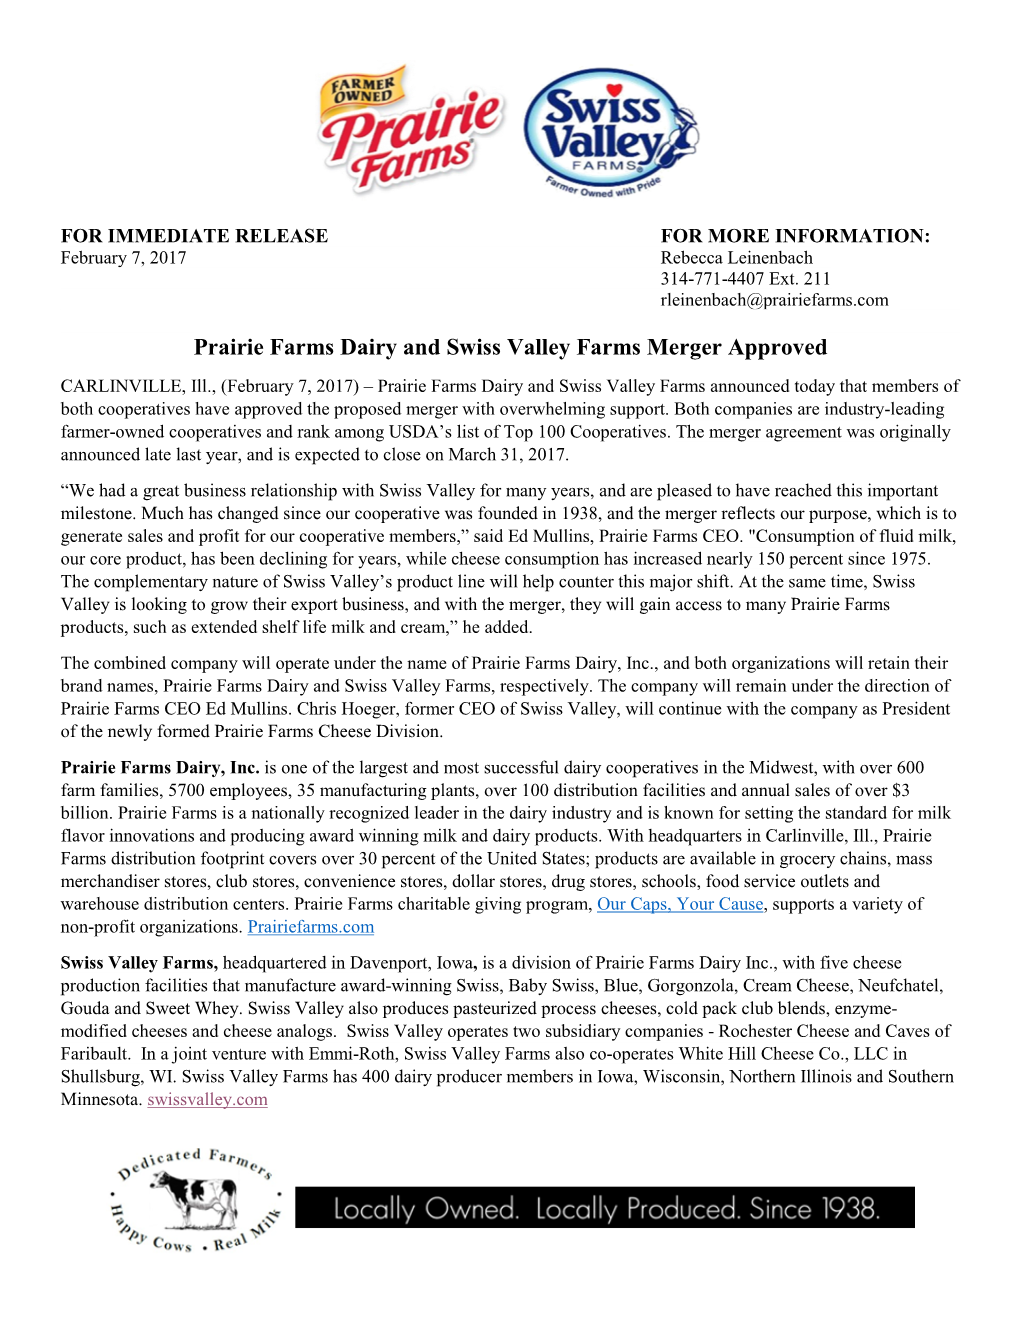 Prairie Farms Dairy and Swiss Valley Farms Merger Approved